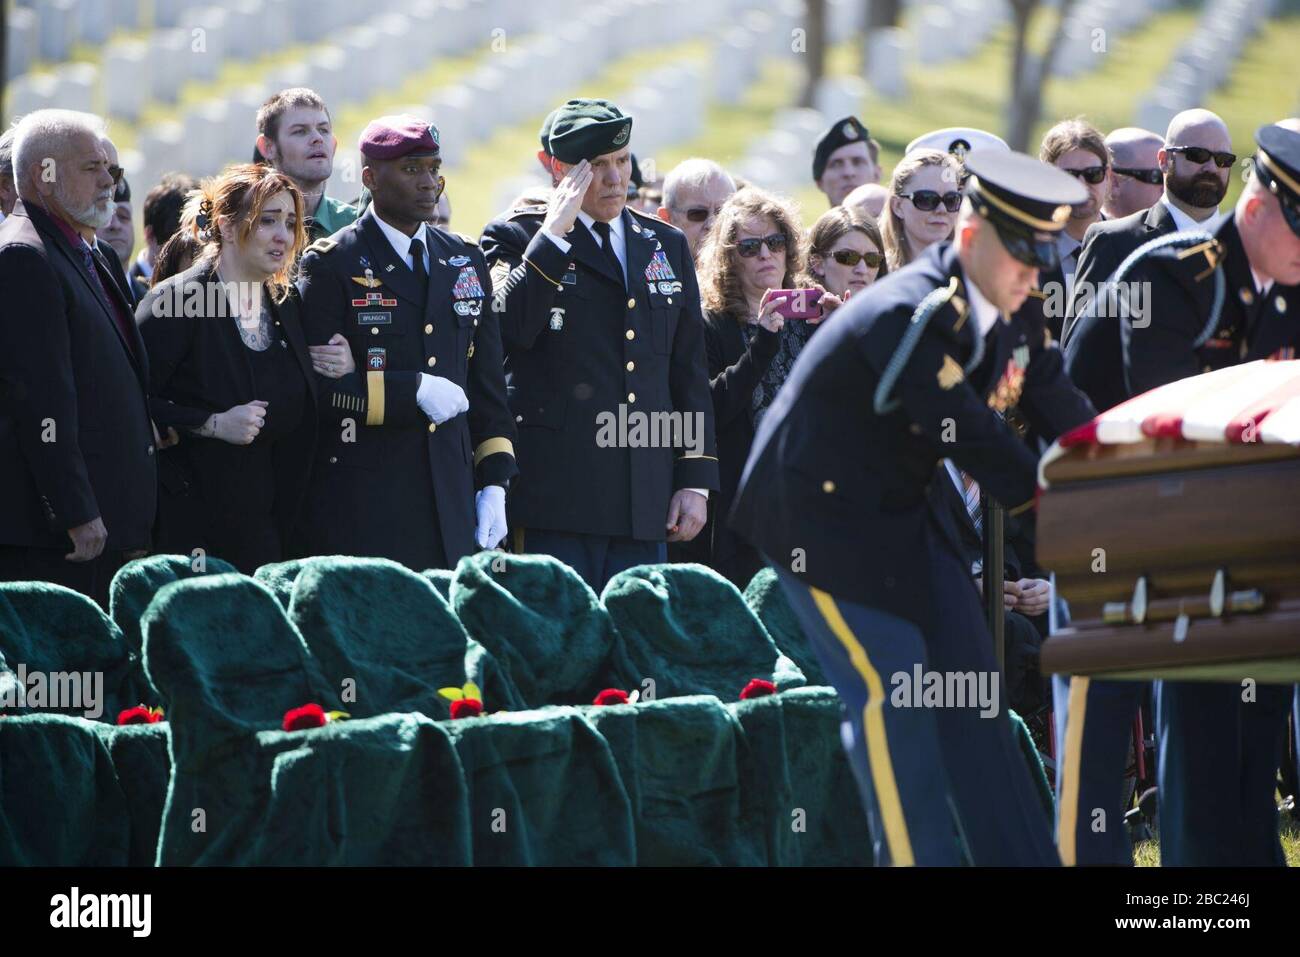 Graveside service for U.S. Army Sgt First Class Matthew Q. McClintock takes place in Section 60 of Arlington National Cemetery (25229181279). Stock Photo